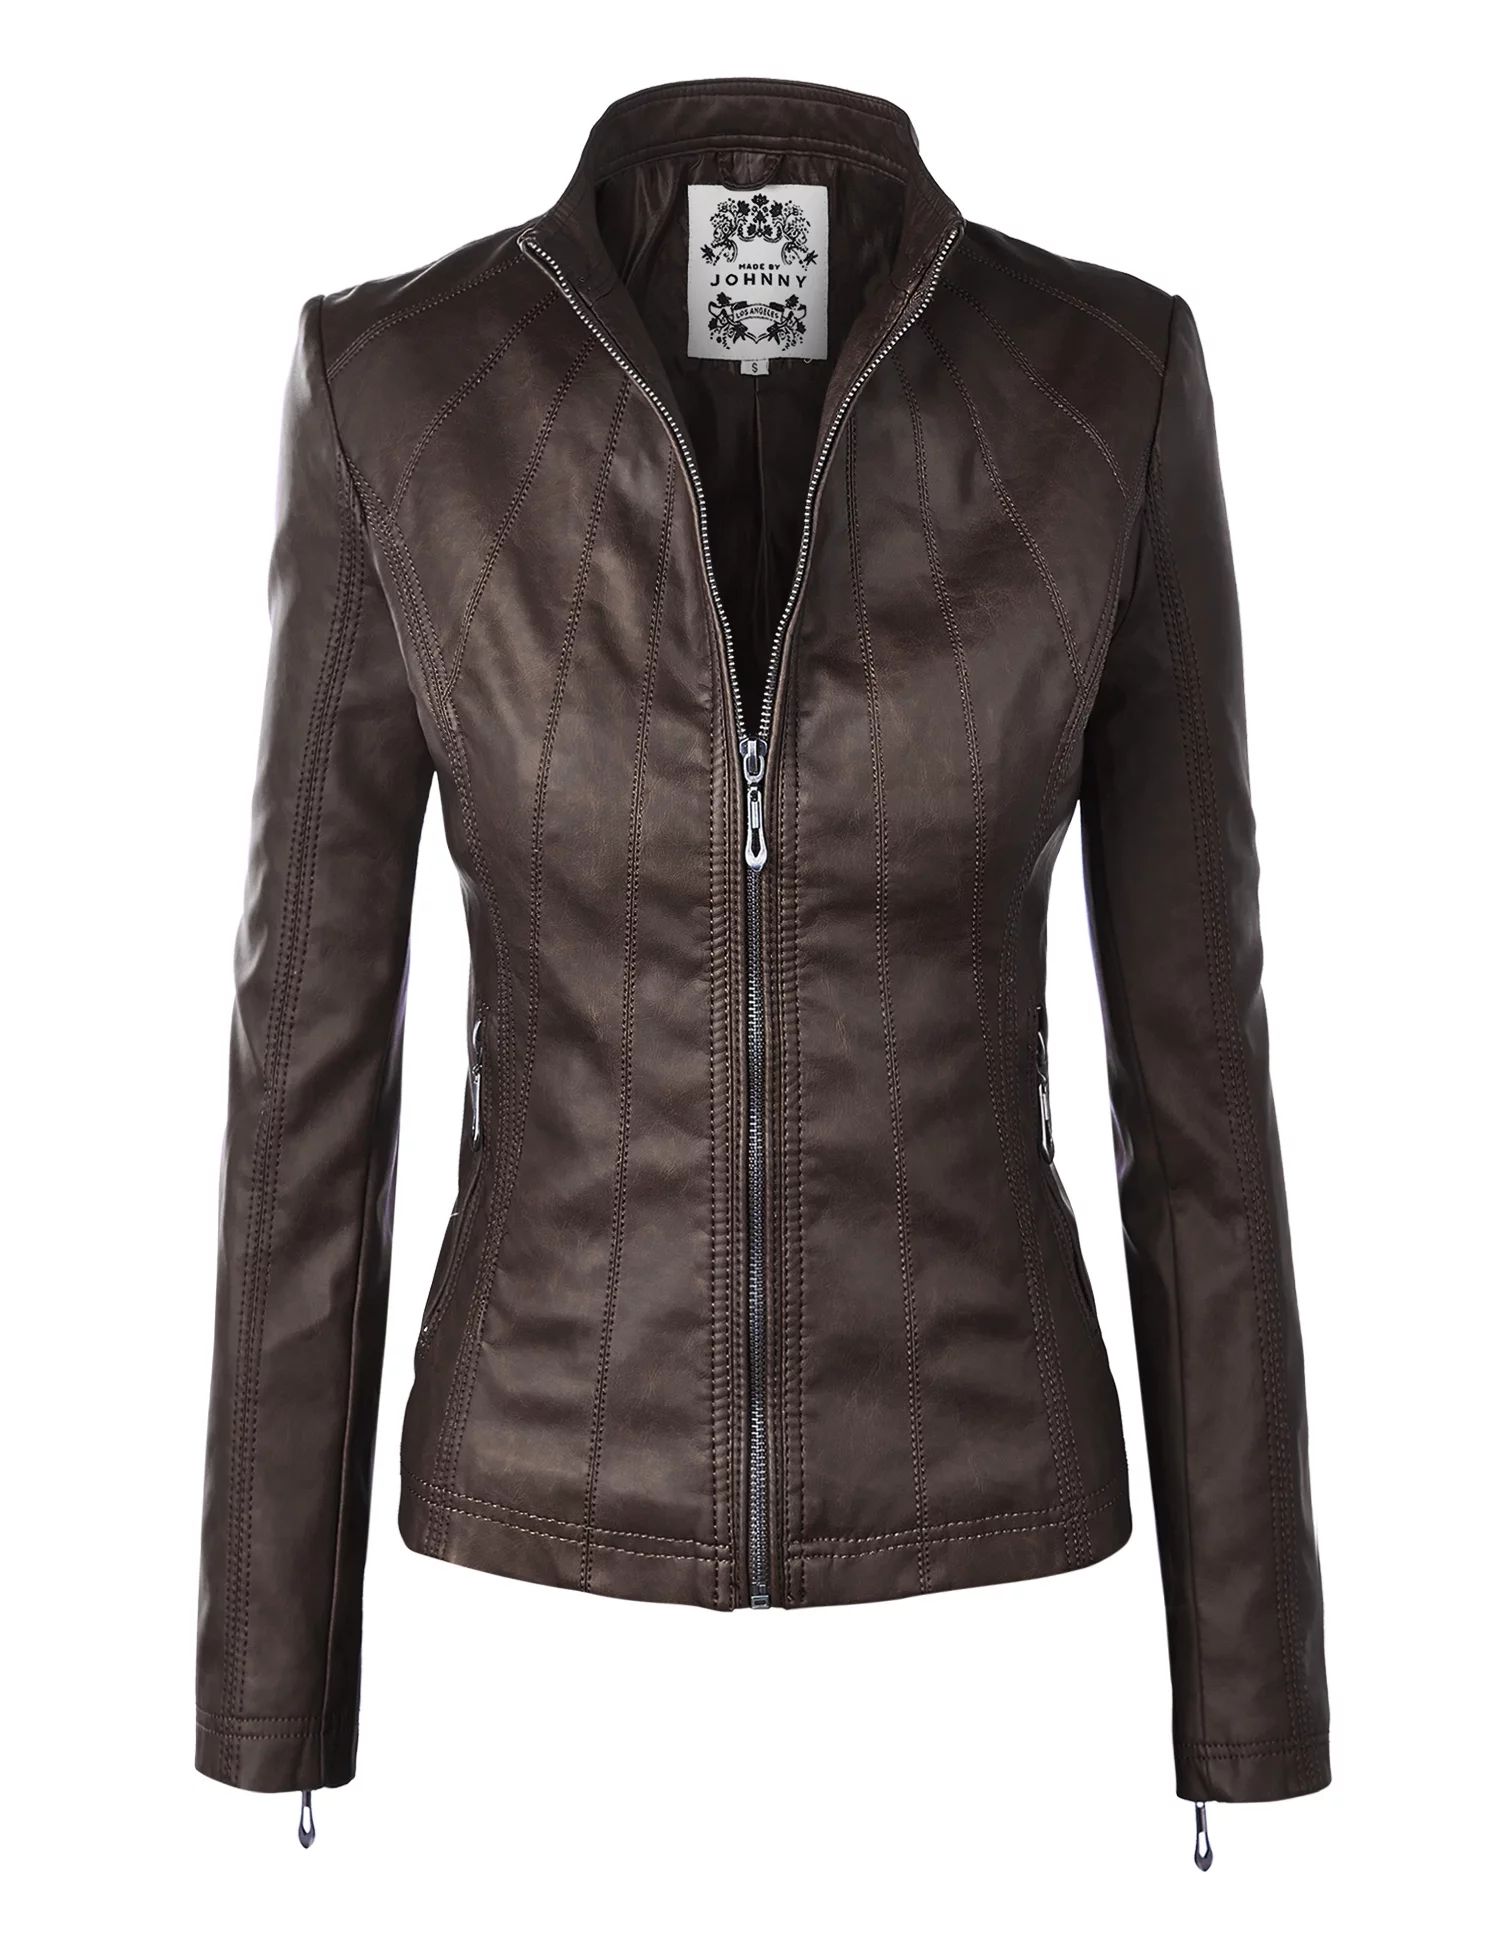 Made By Johnny MBJ WJC877 Womens Panelled Faux Leather Moto Jacket S Coffee | Walmart (US)